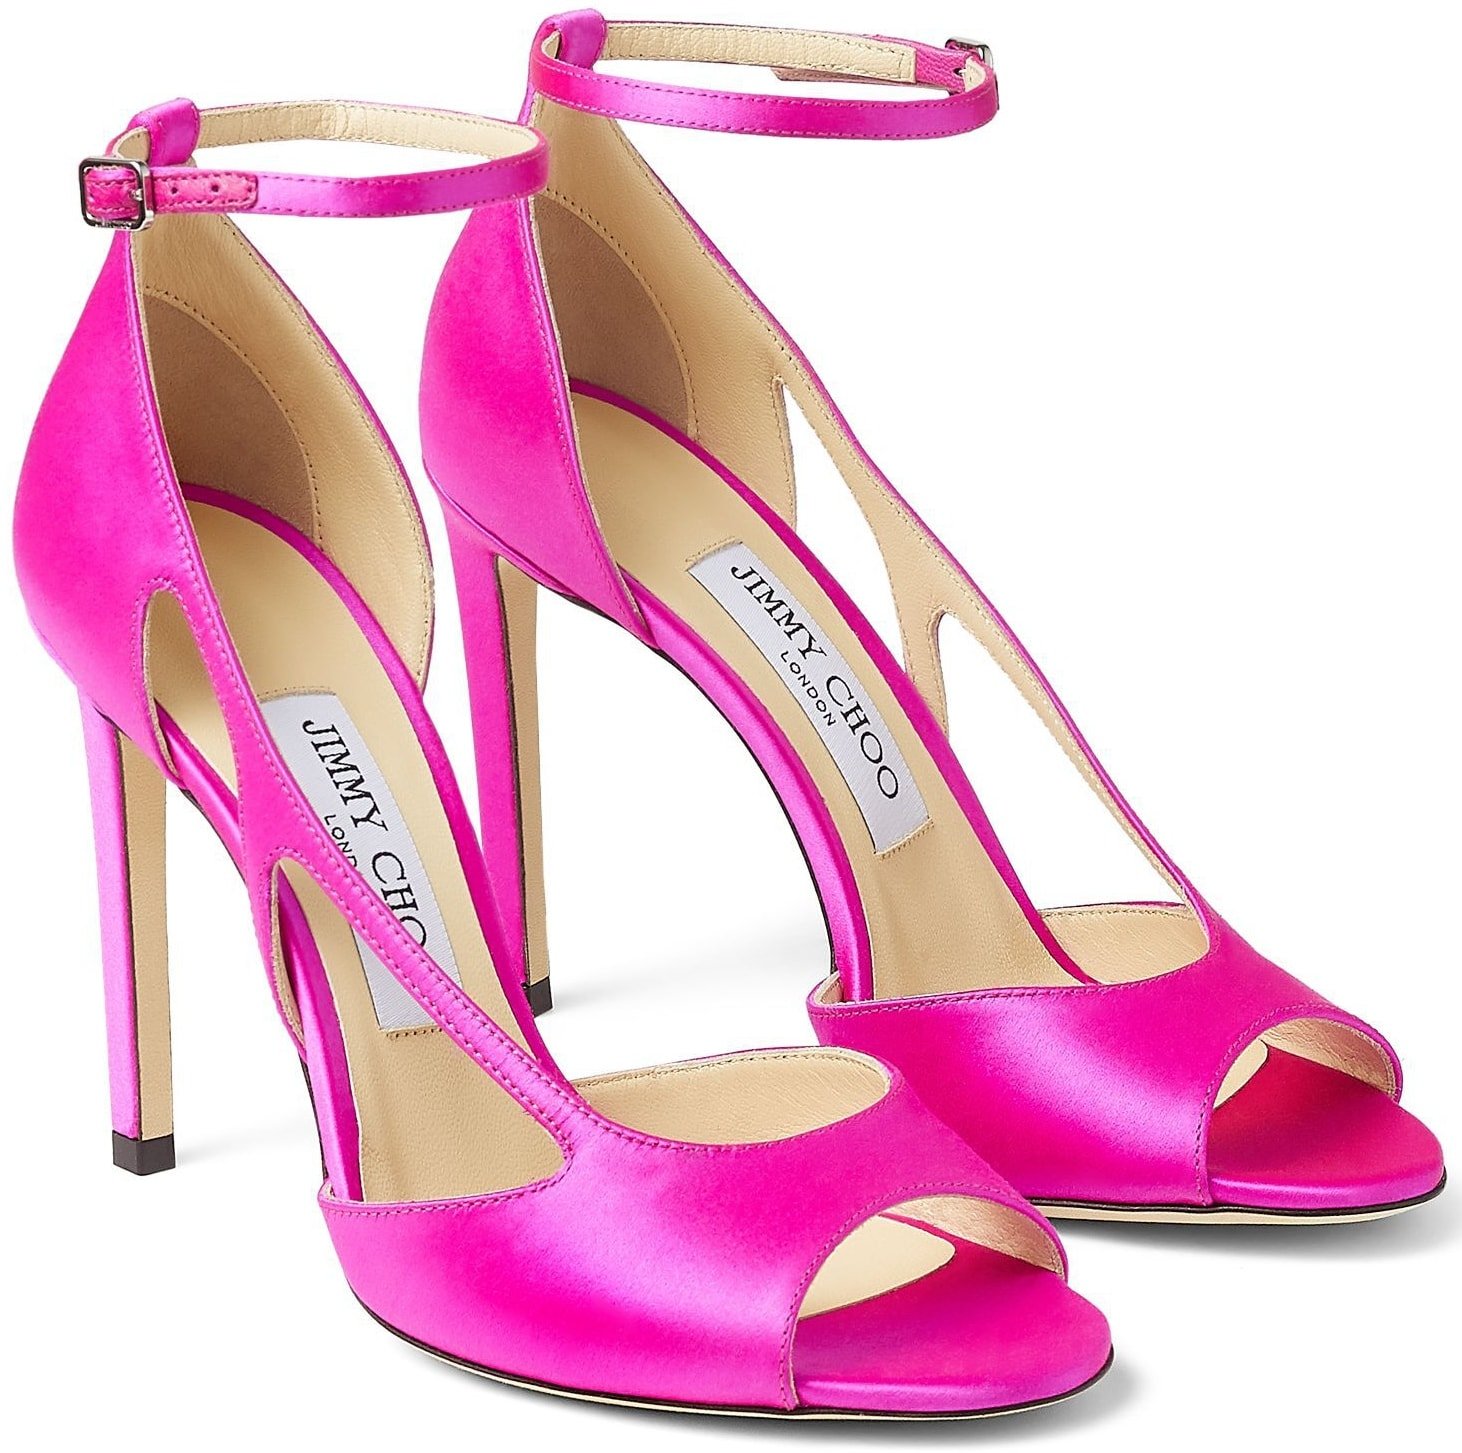 Treat yourself after a hard week to these fuchsia Liu 100mm cutout pumps from Jimmy Choo that elevate your mood and look with a stunning stiletto heel